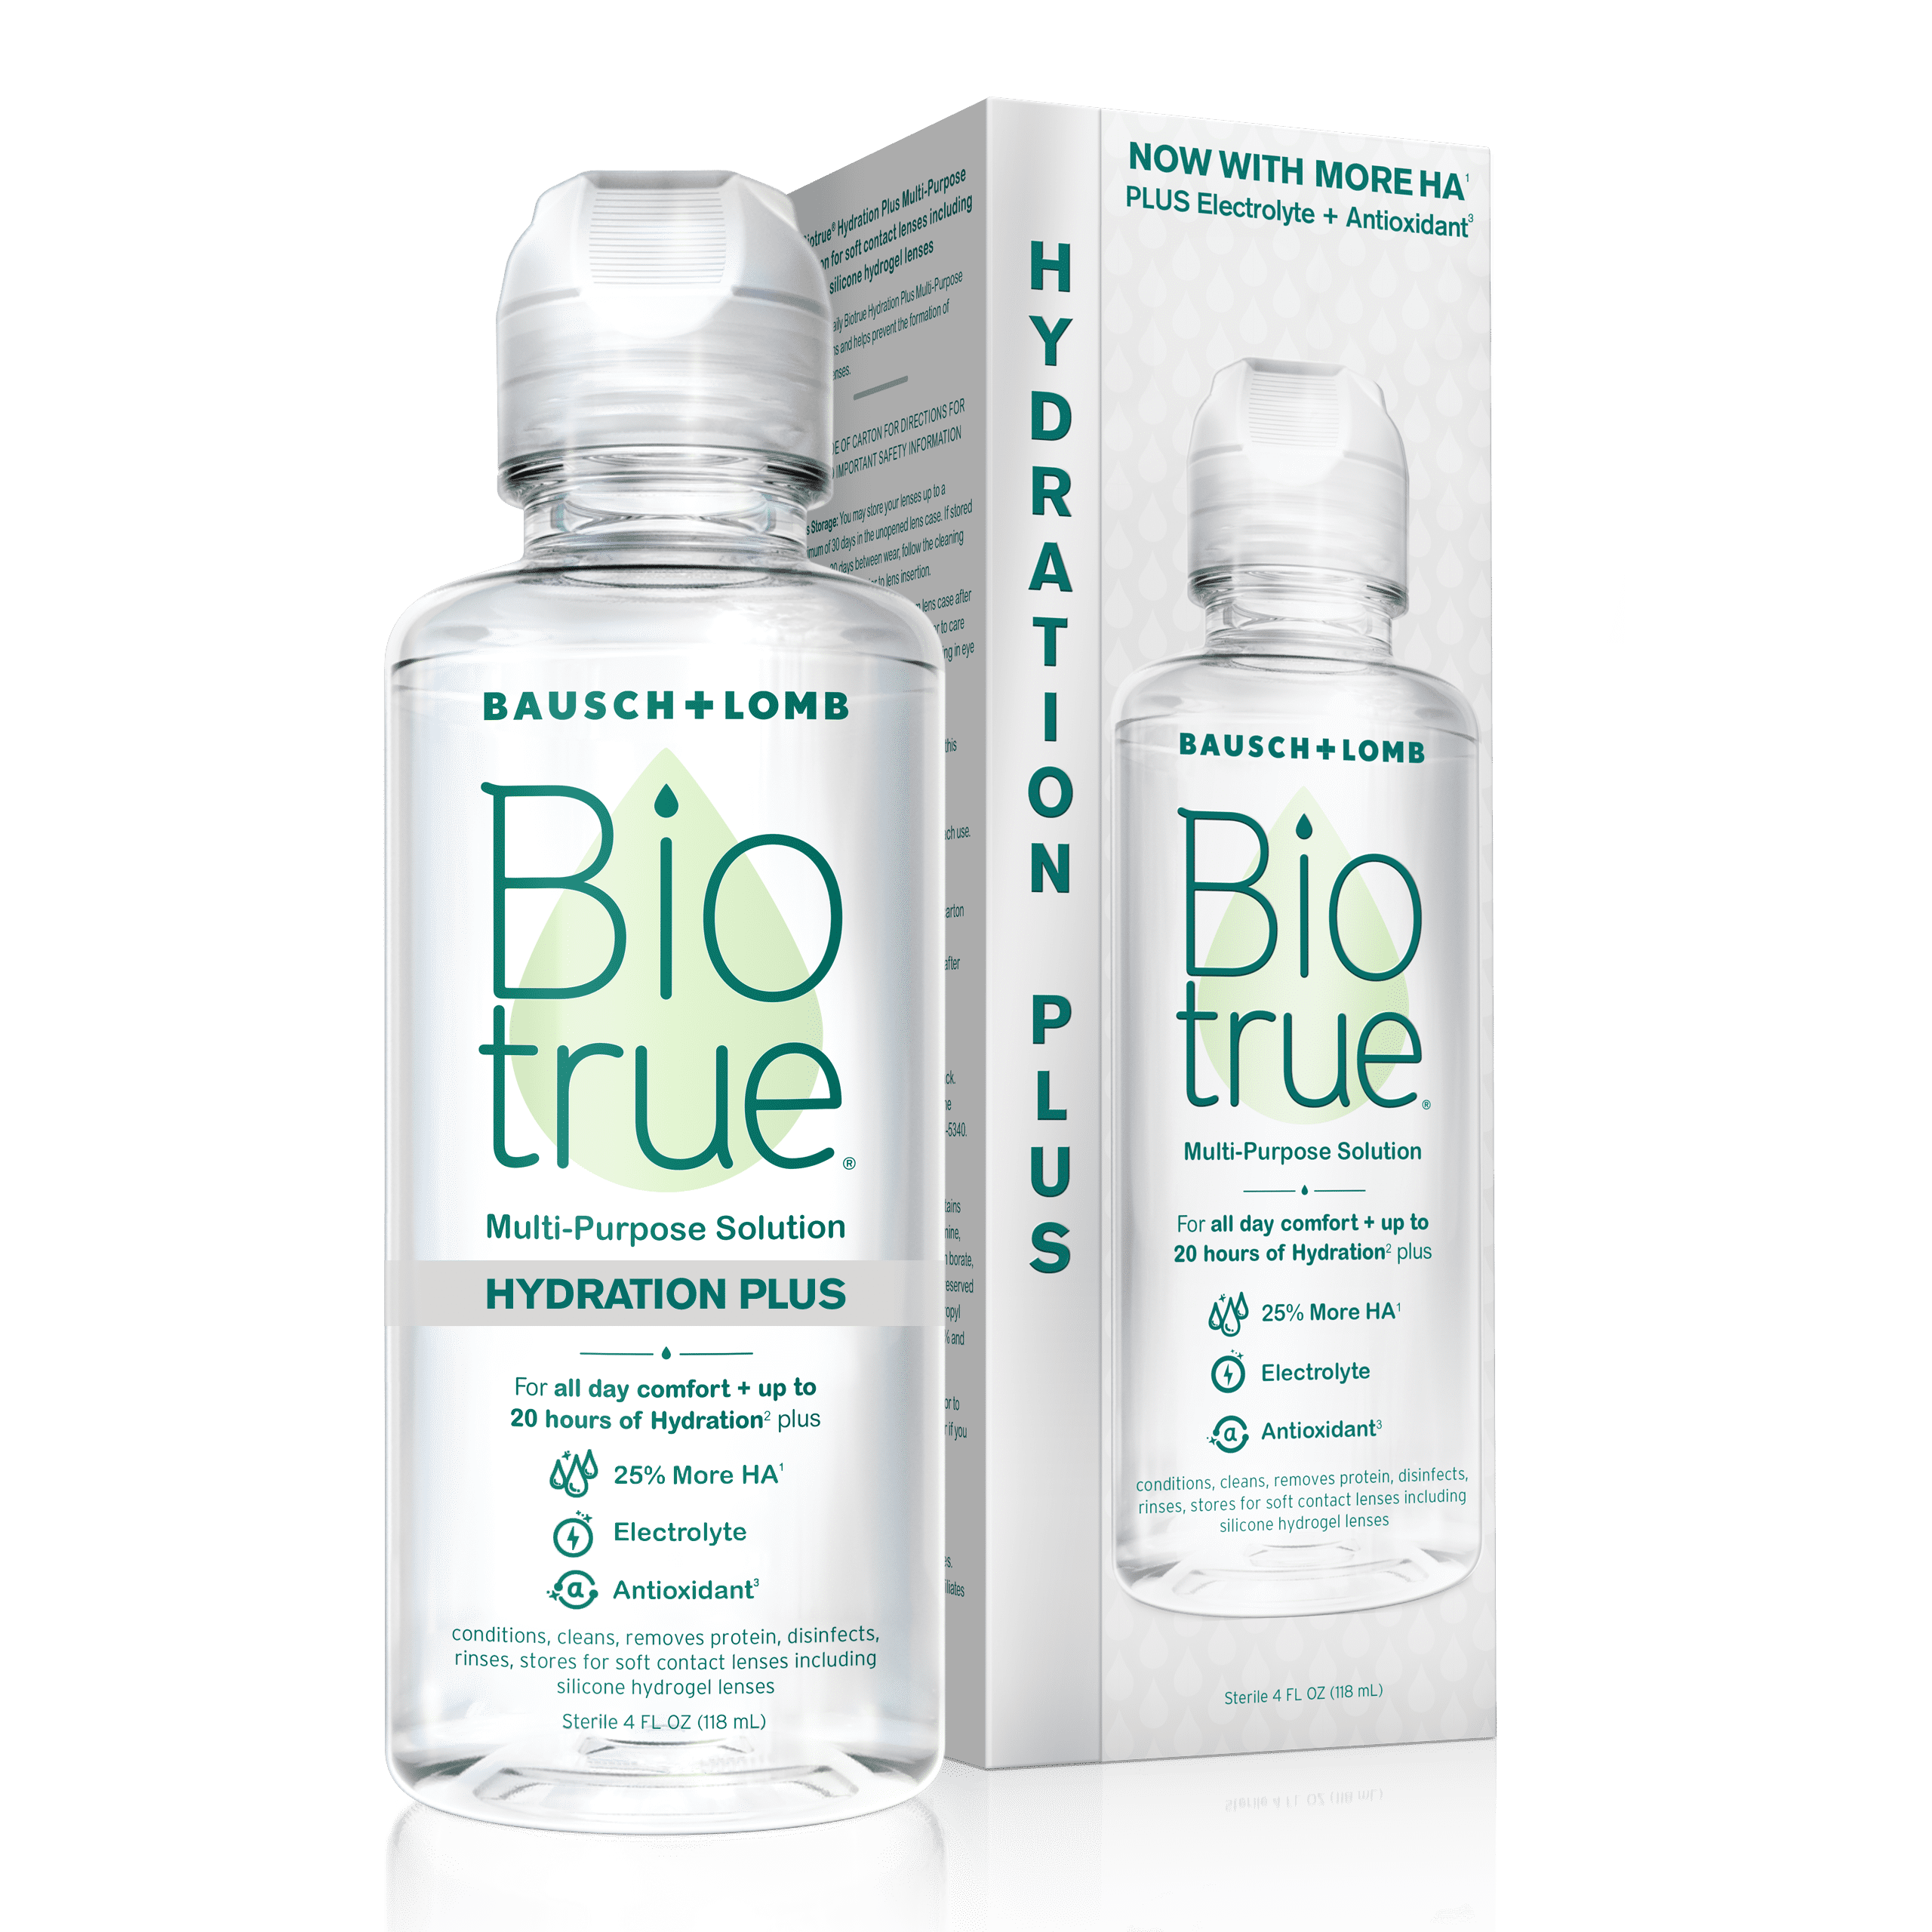 Biotrue Hydration Plus Contact Lens Solution, Multi-Purpose Solution for Soft Contact Lenses, 4 FL OZ